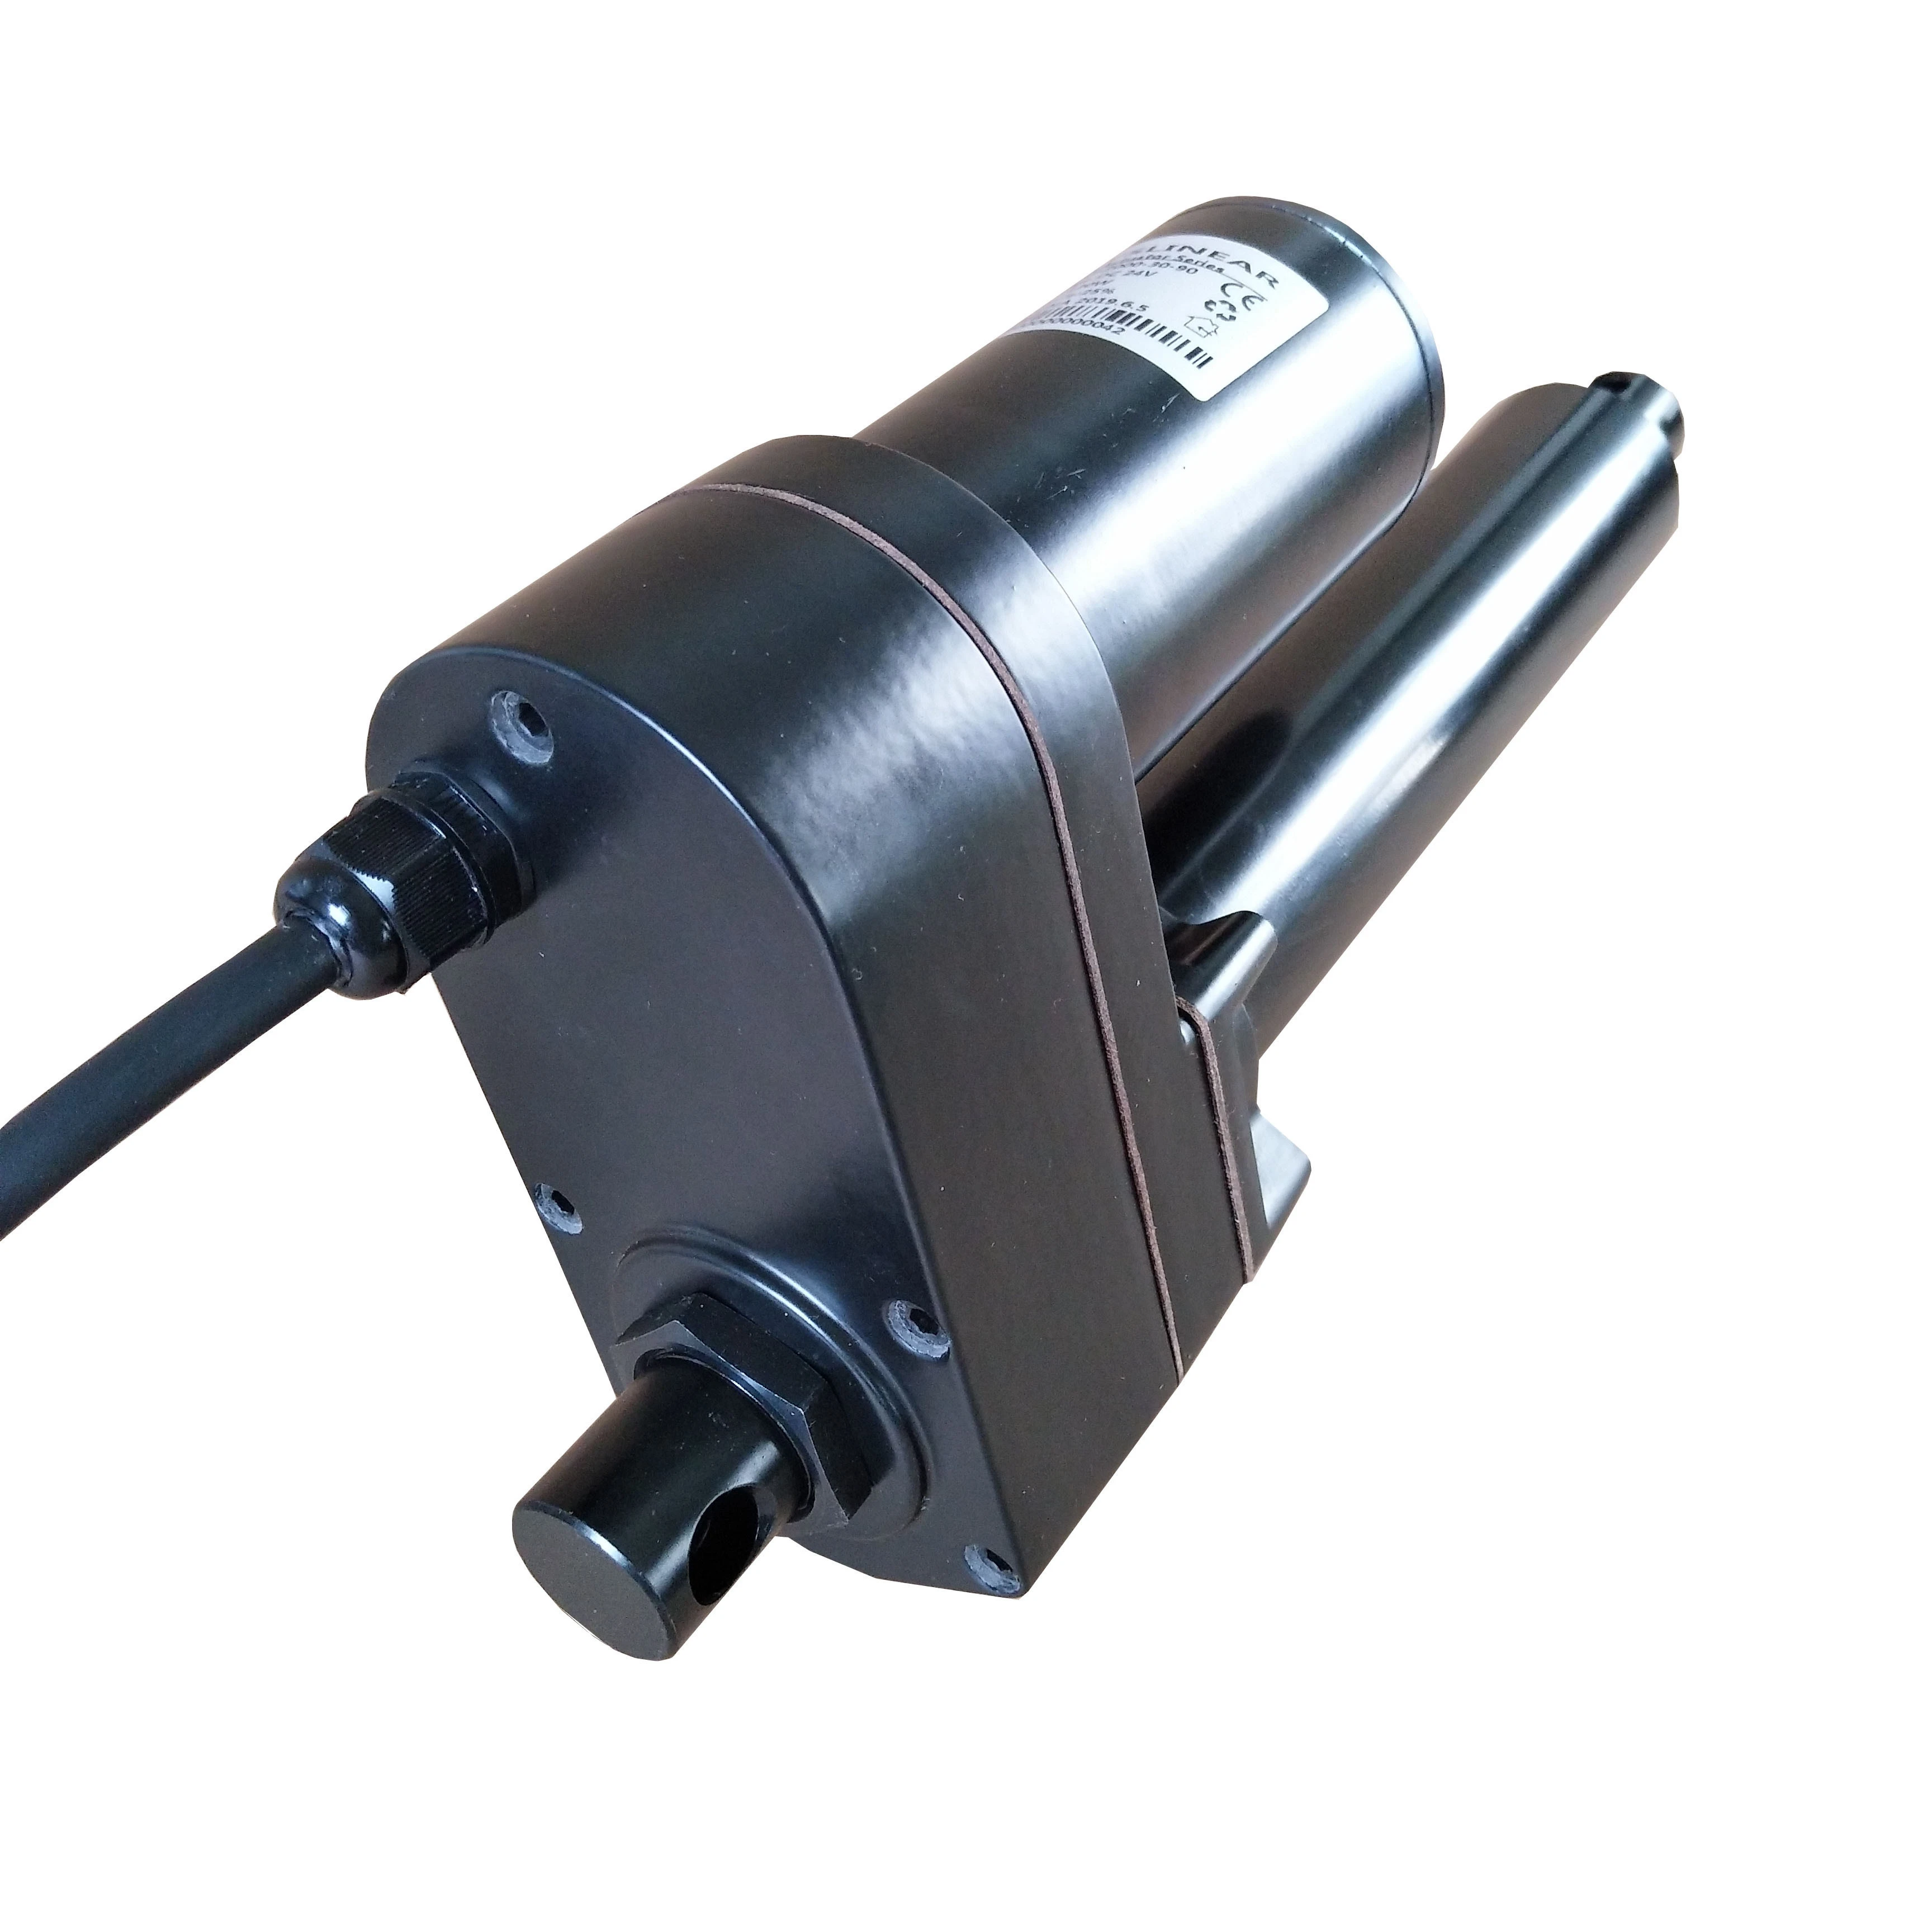 Different kinds of linear actuator with encoder